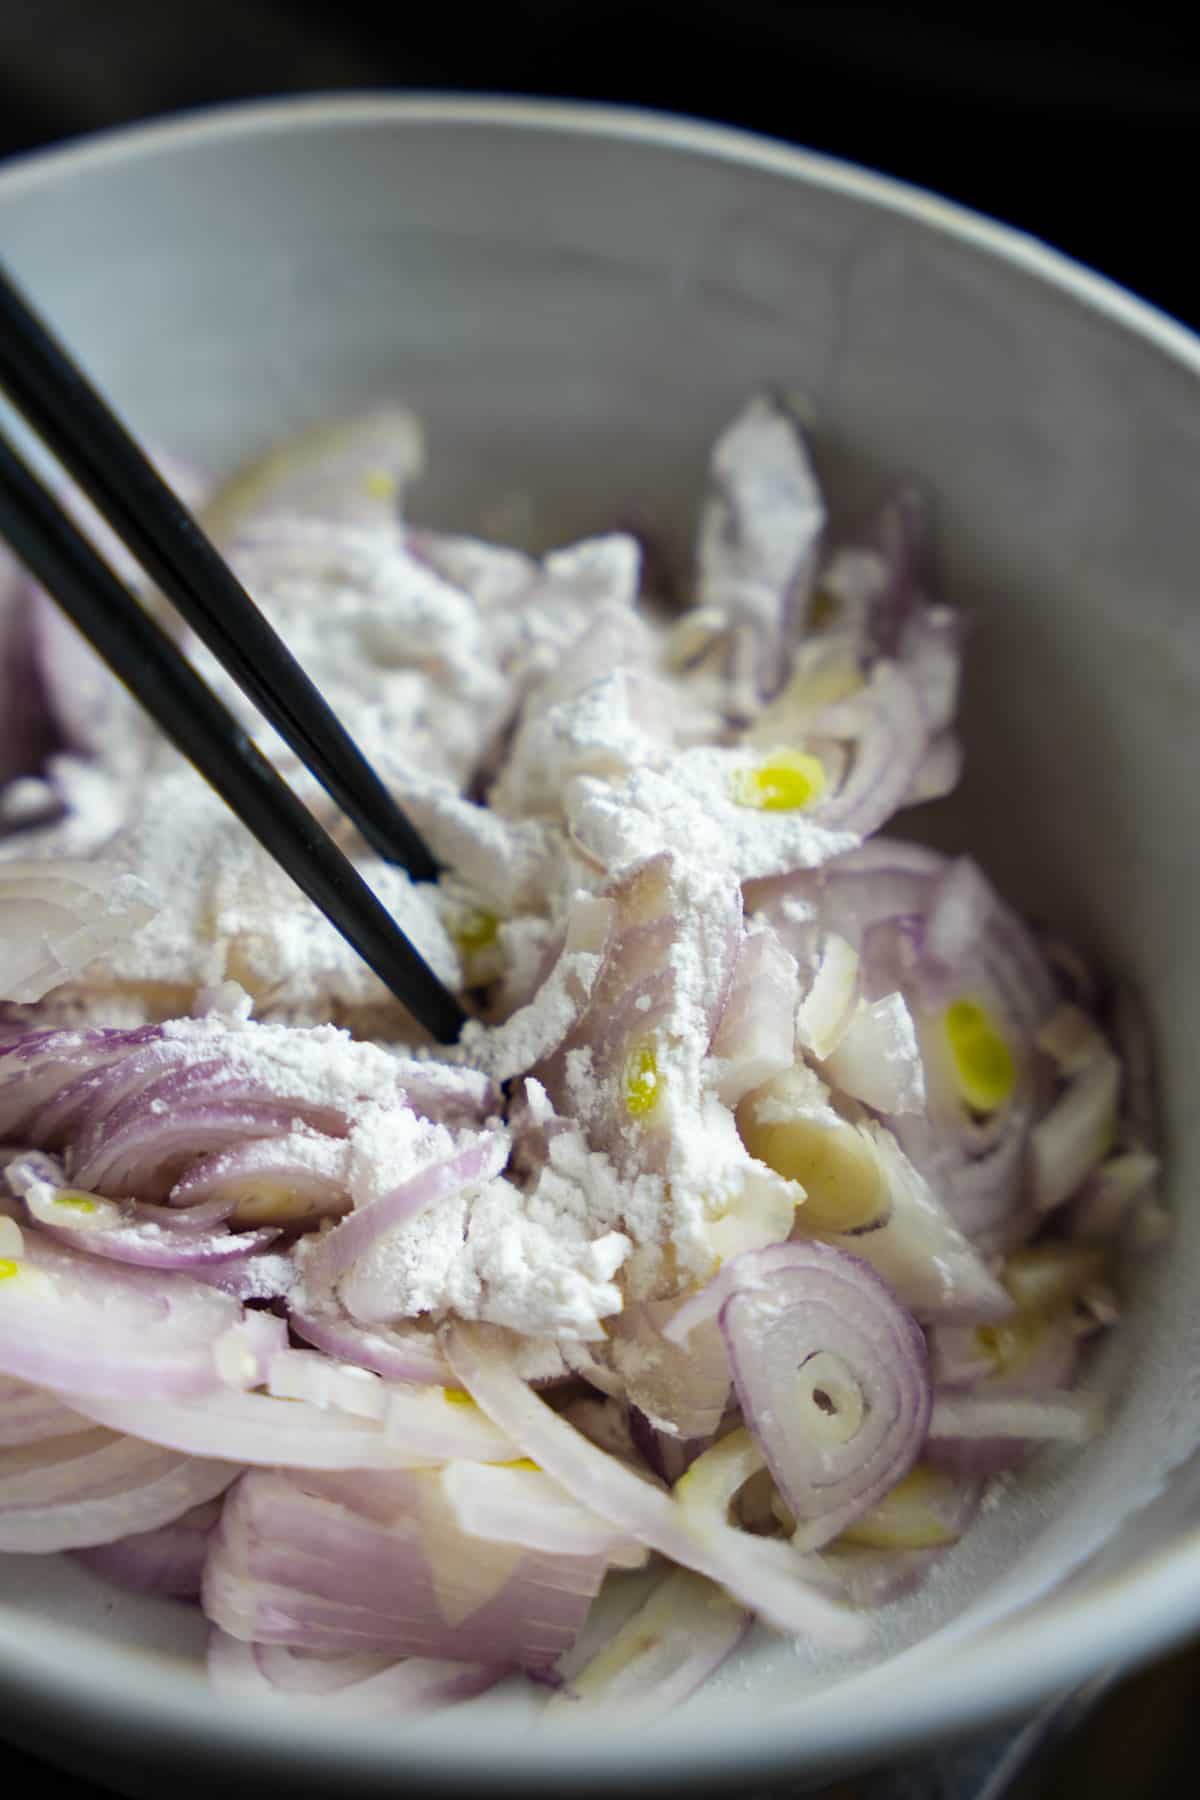 Mixing tapioca flour and sliced shallots with chop sticks in a bowl.